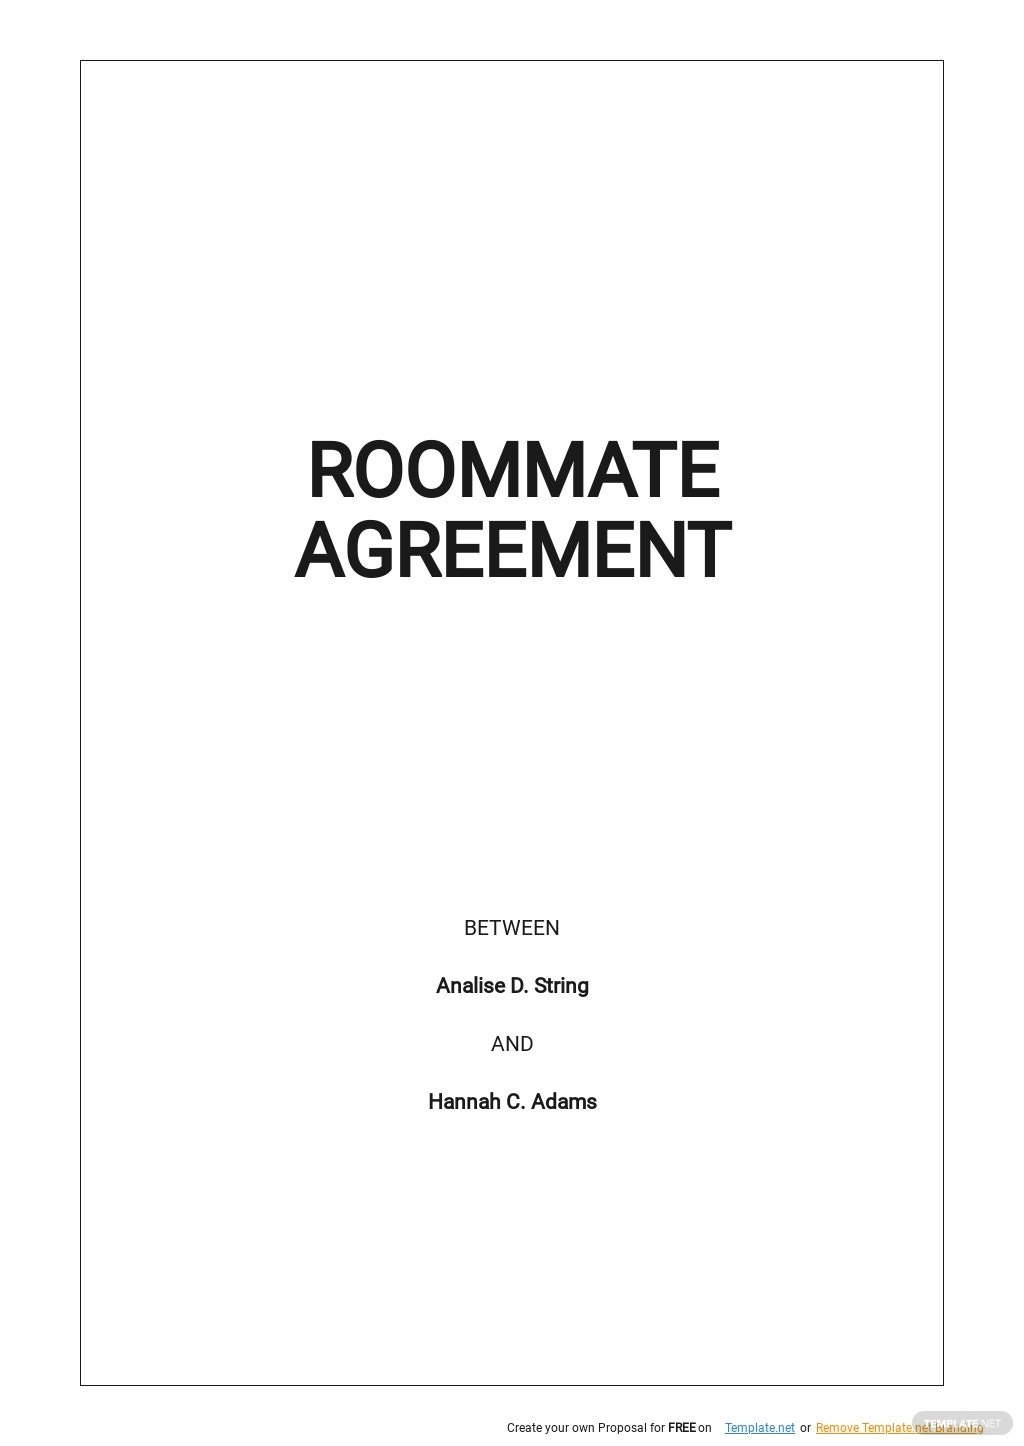 Basic Roommate Agreement Template ?width=530